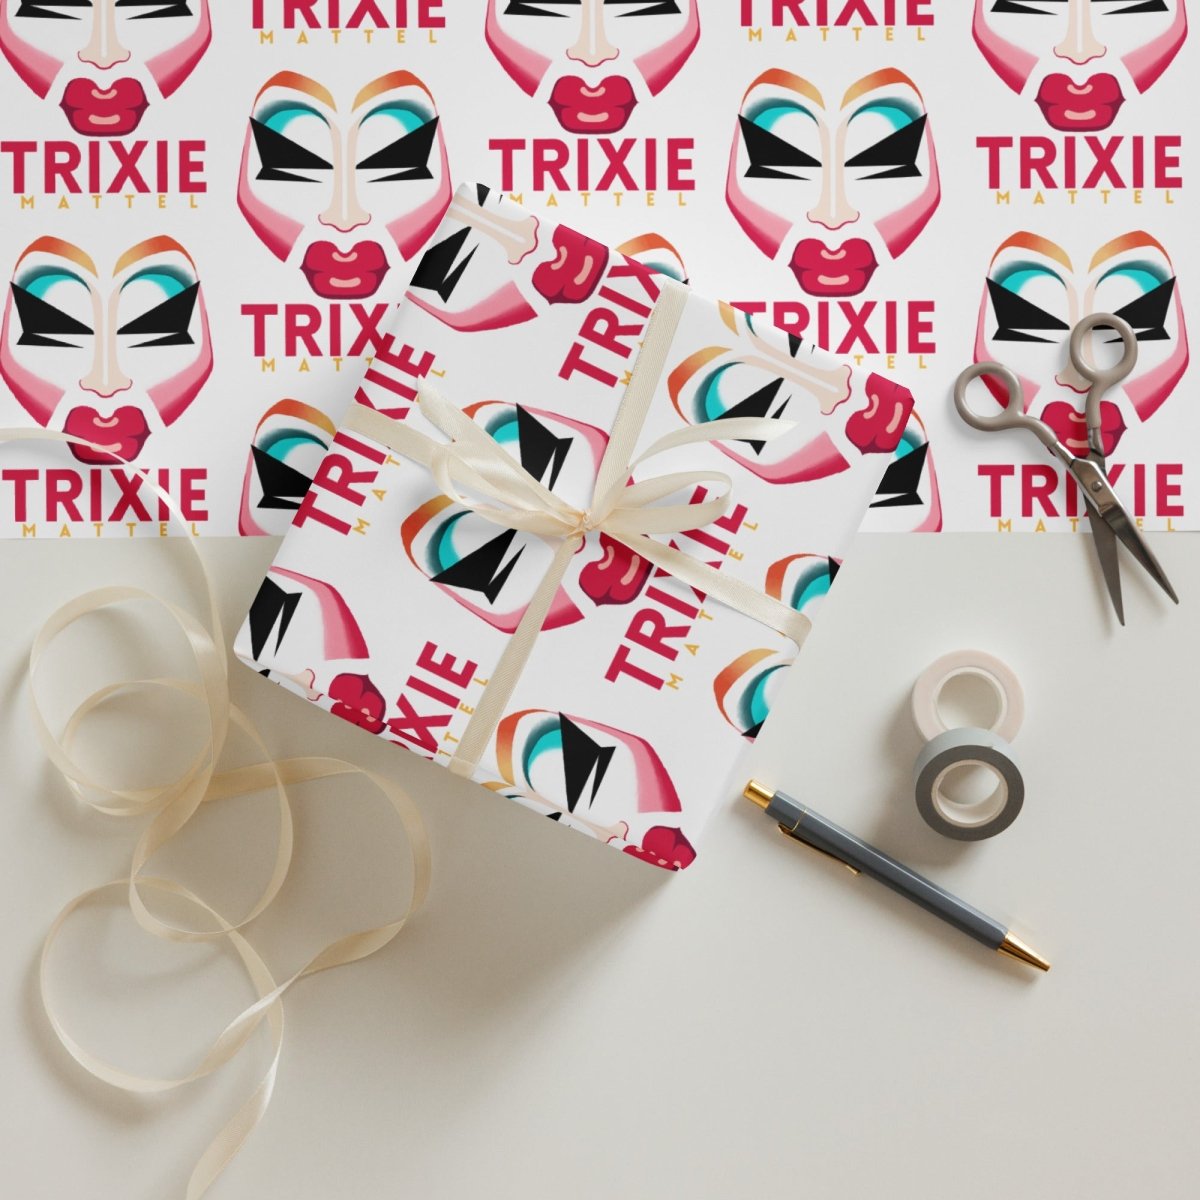 Trixie Mattel - Face Wrapping paper sheets - dragqueenmerch